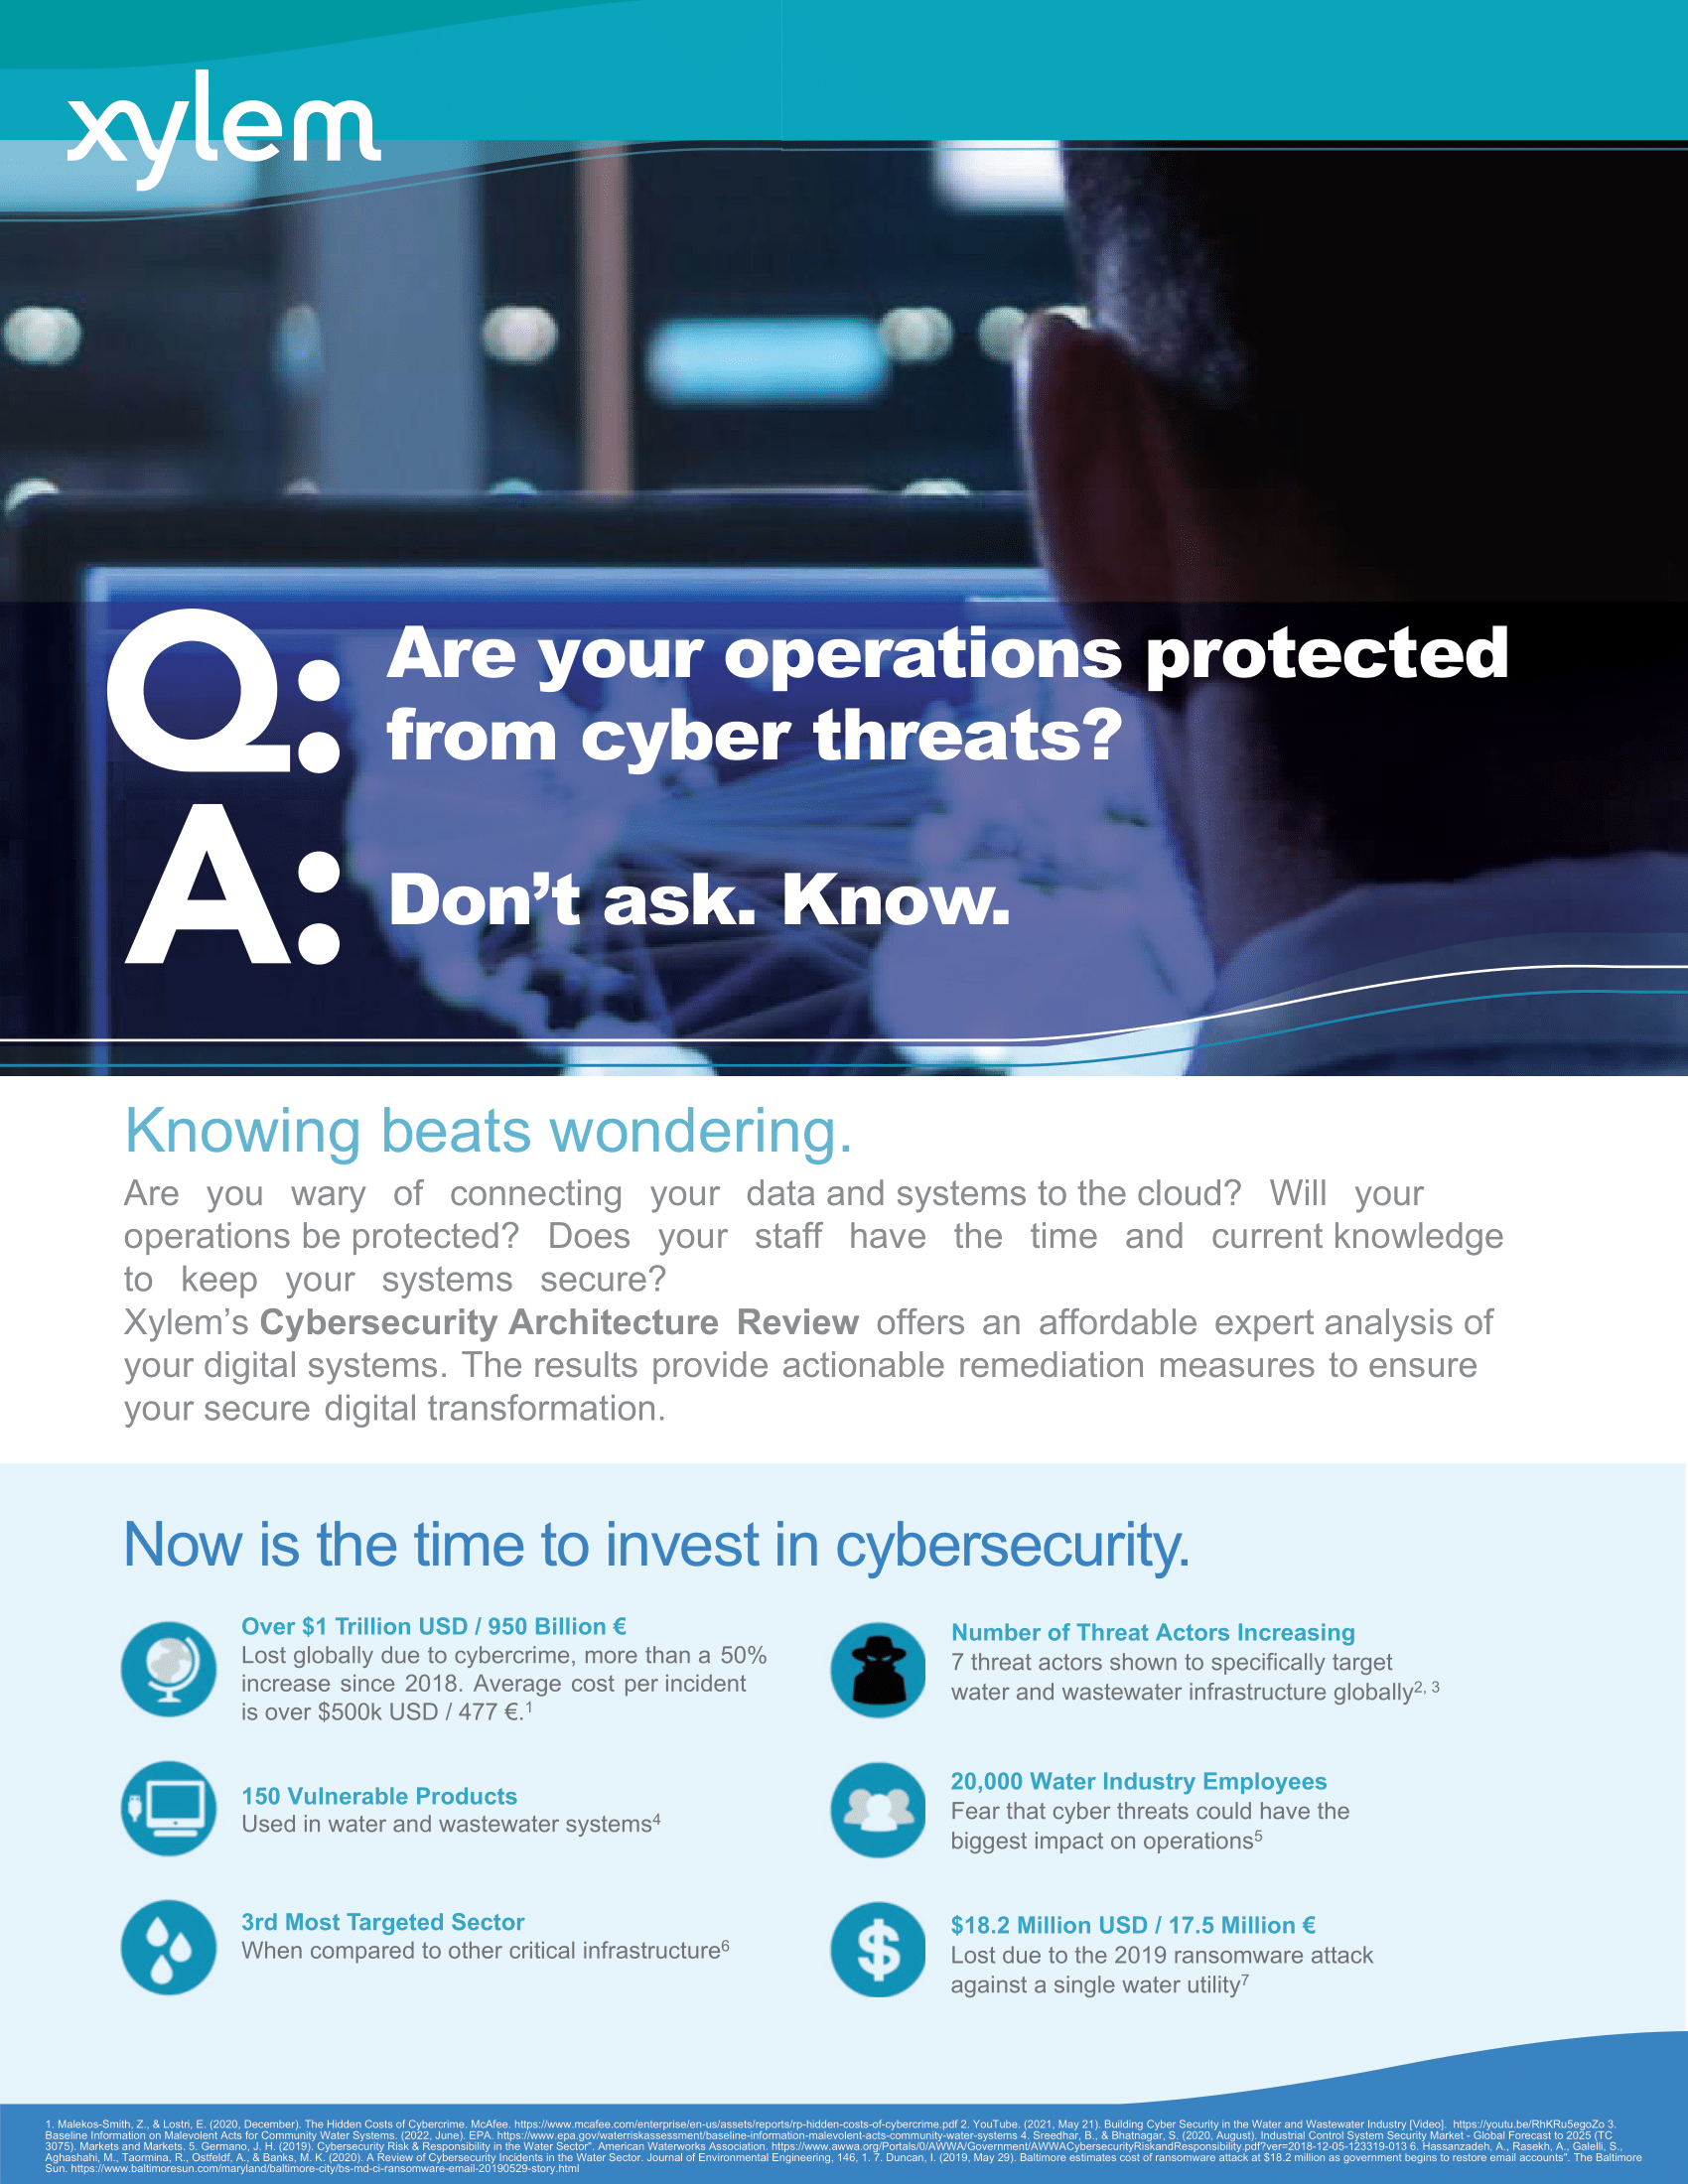 Xylem
Q: Are your operations protected from cyber threats?
A: Don't ask. Know.
Xylem's Cybersecurity Architecture Review offers an affordable expert analysis of your digital systems.